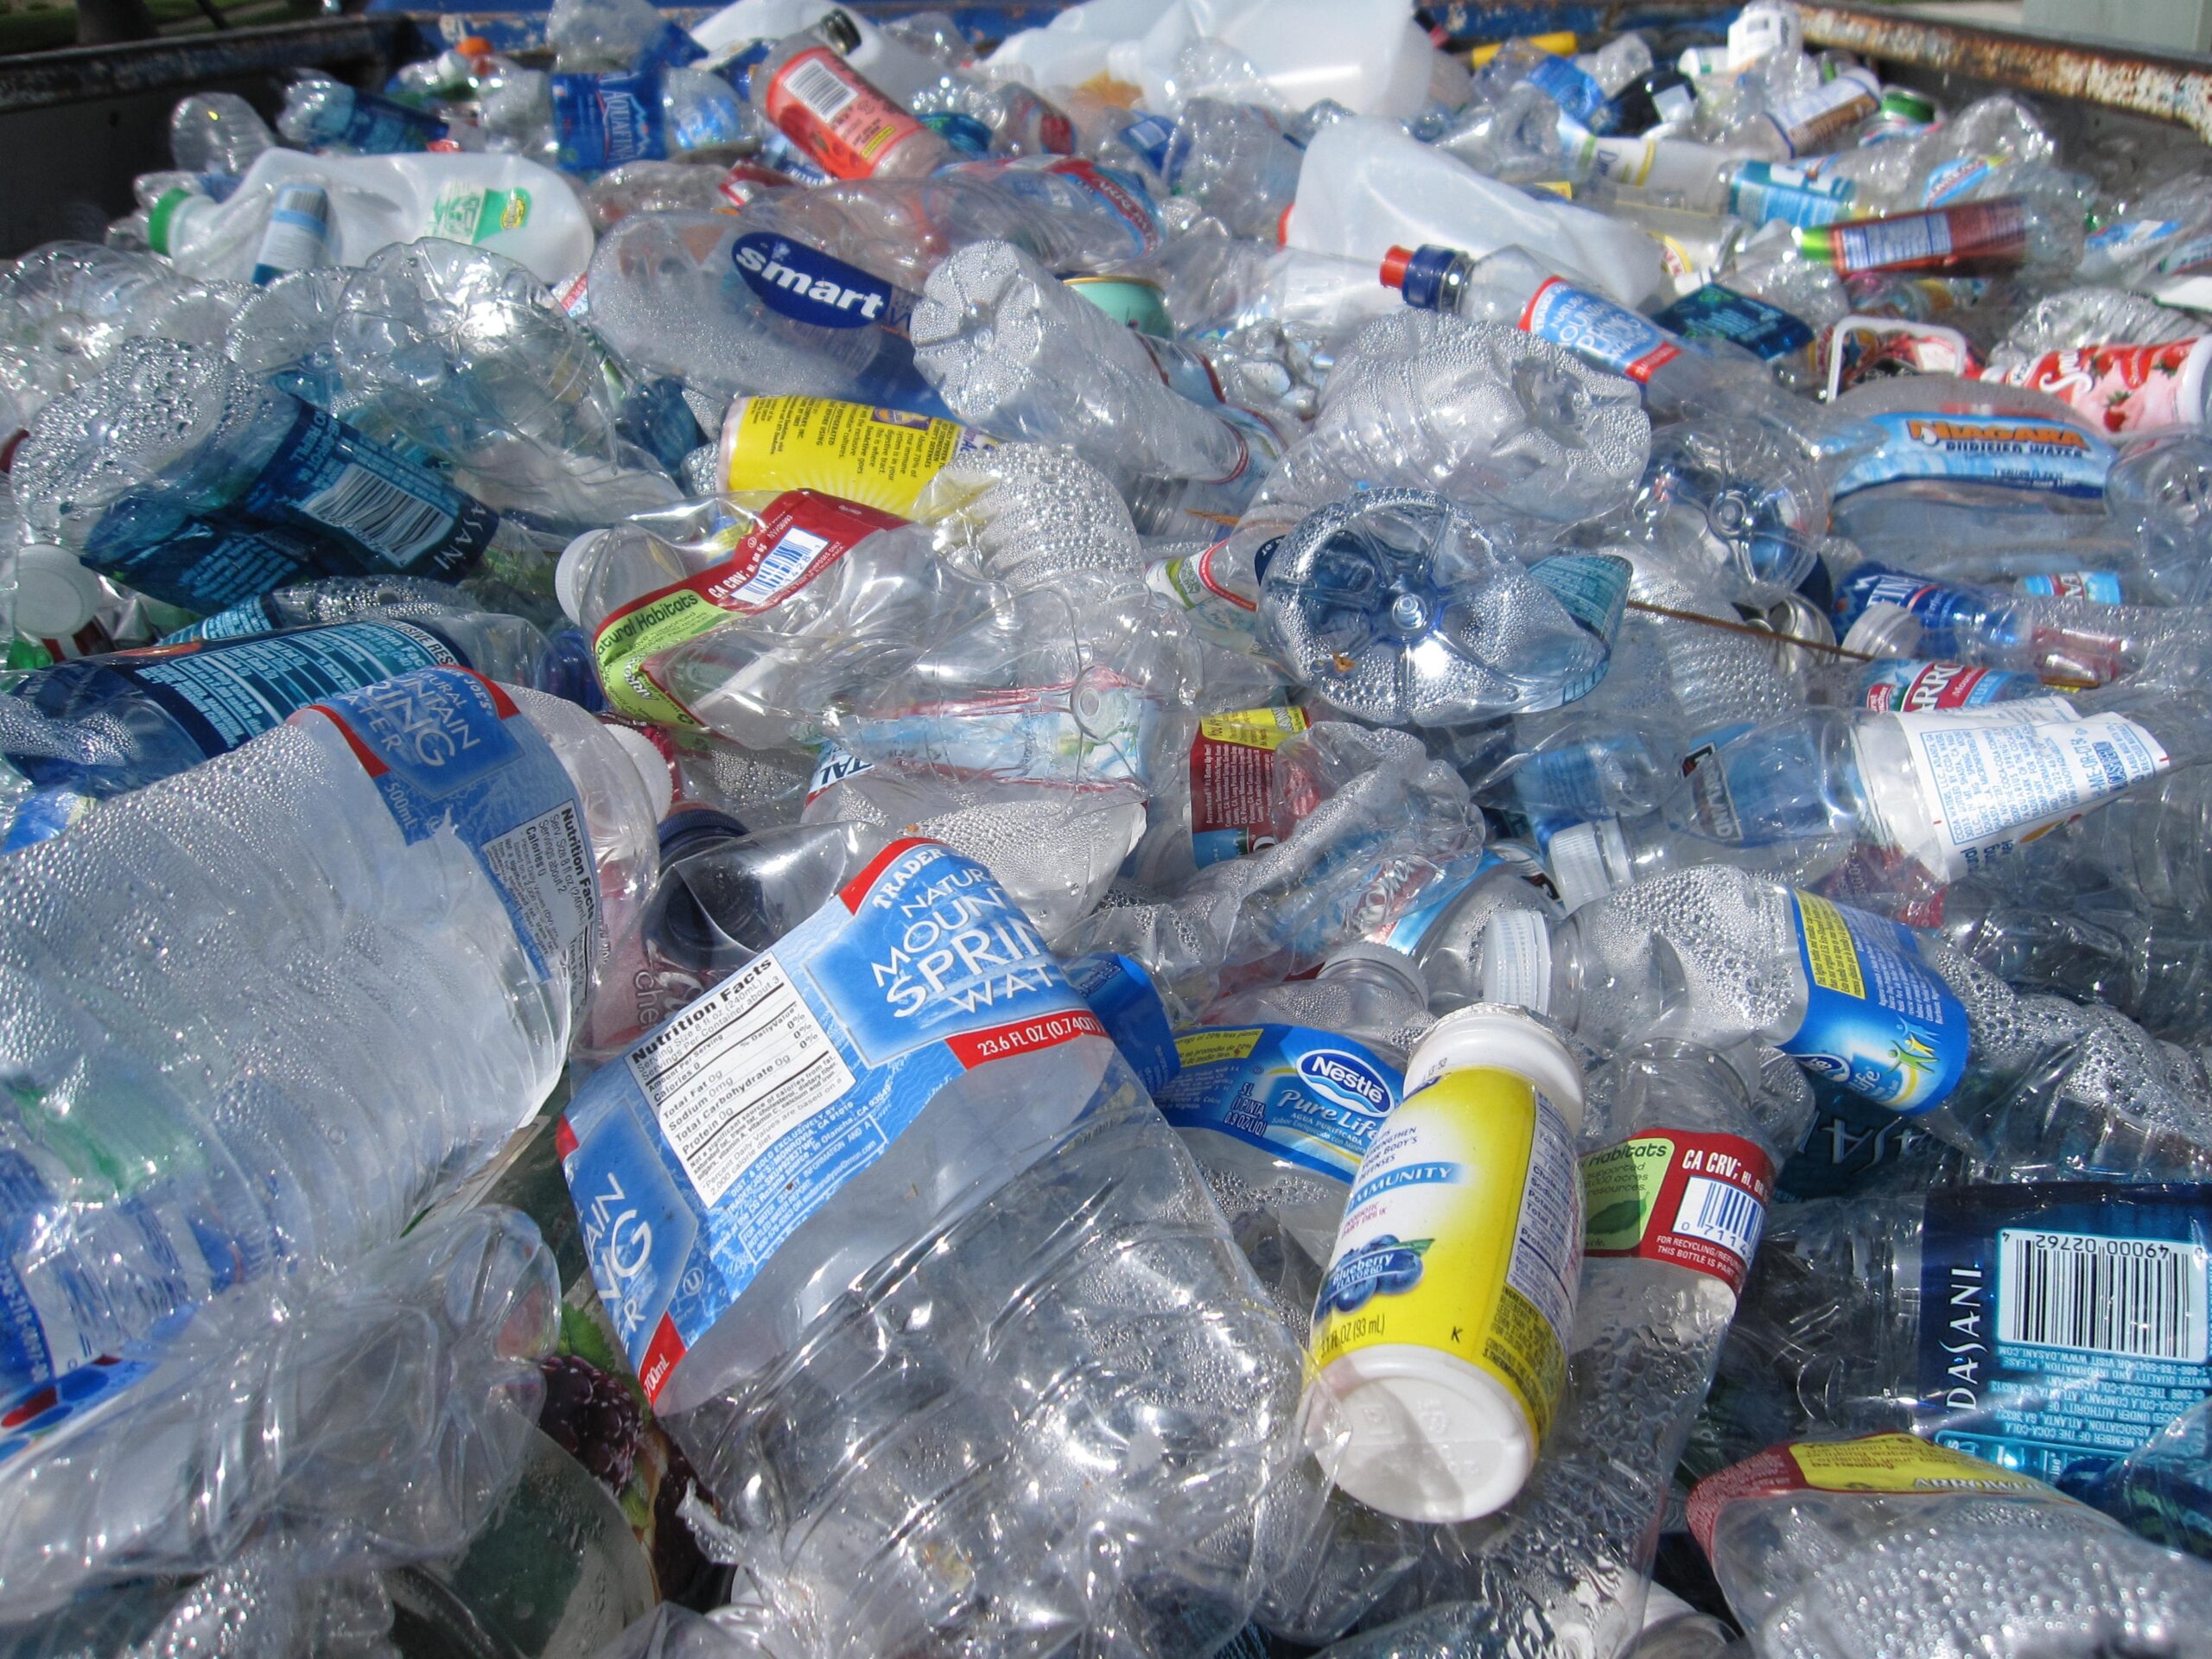 Plastic recycling solutions take opposite approaches